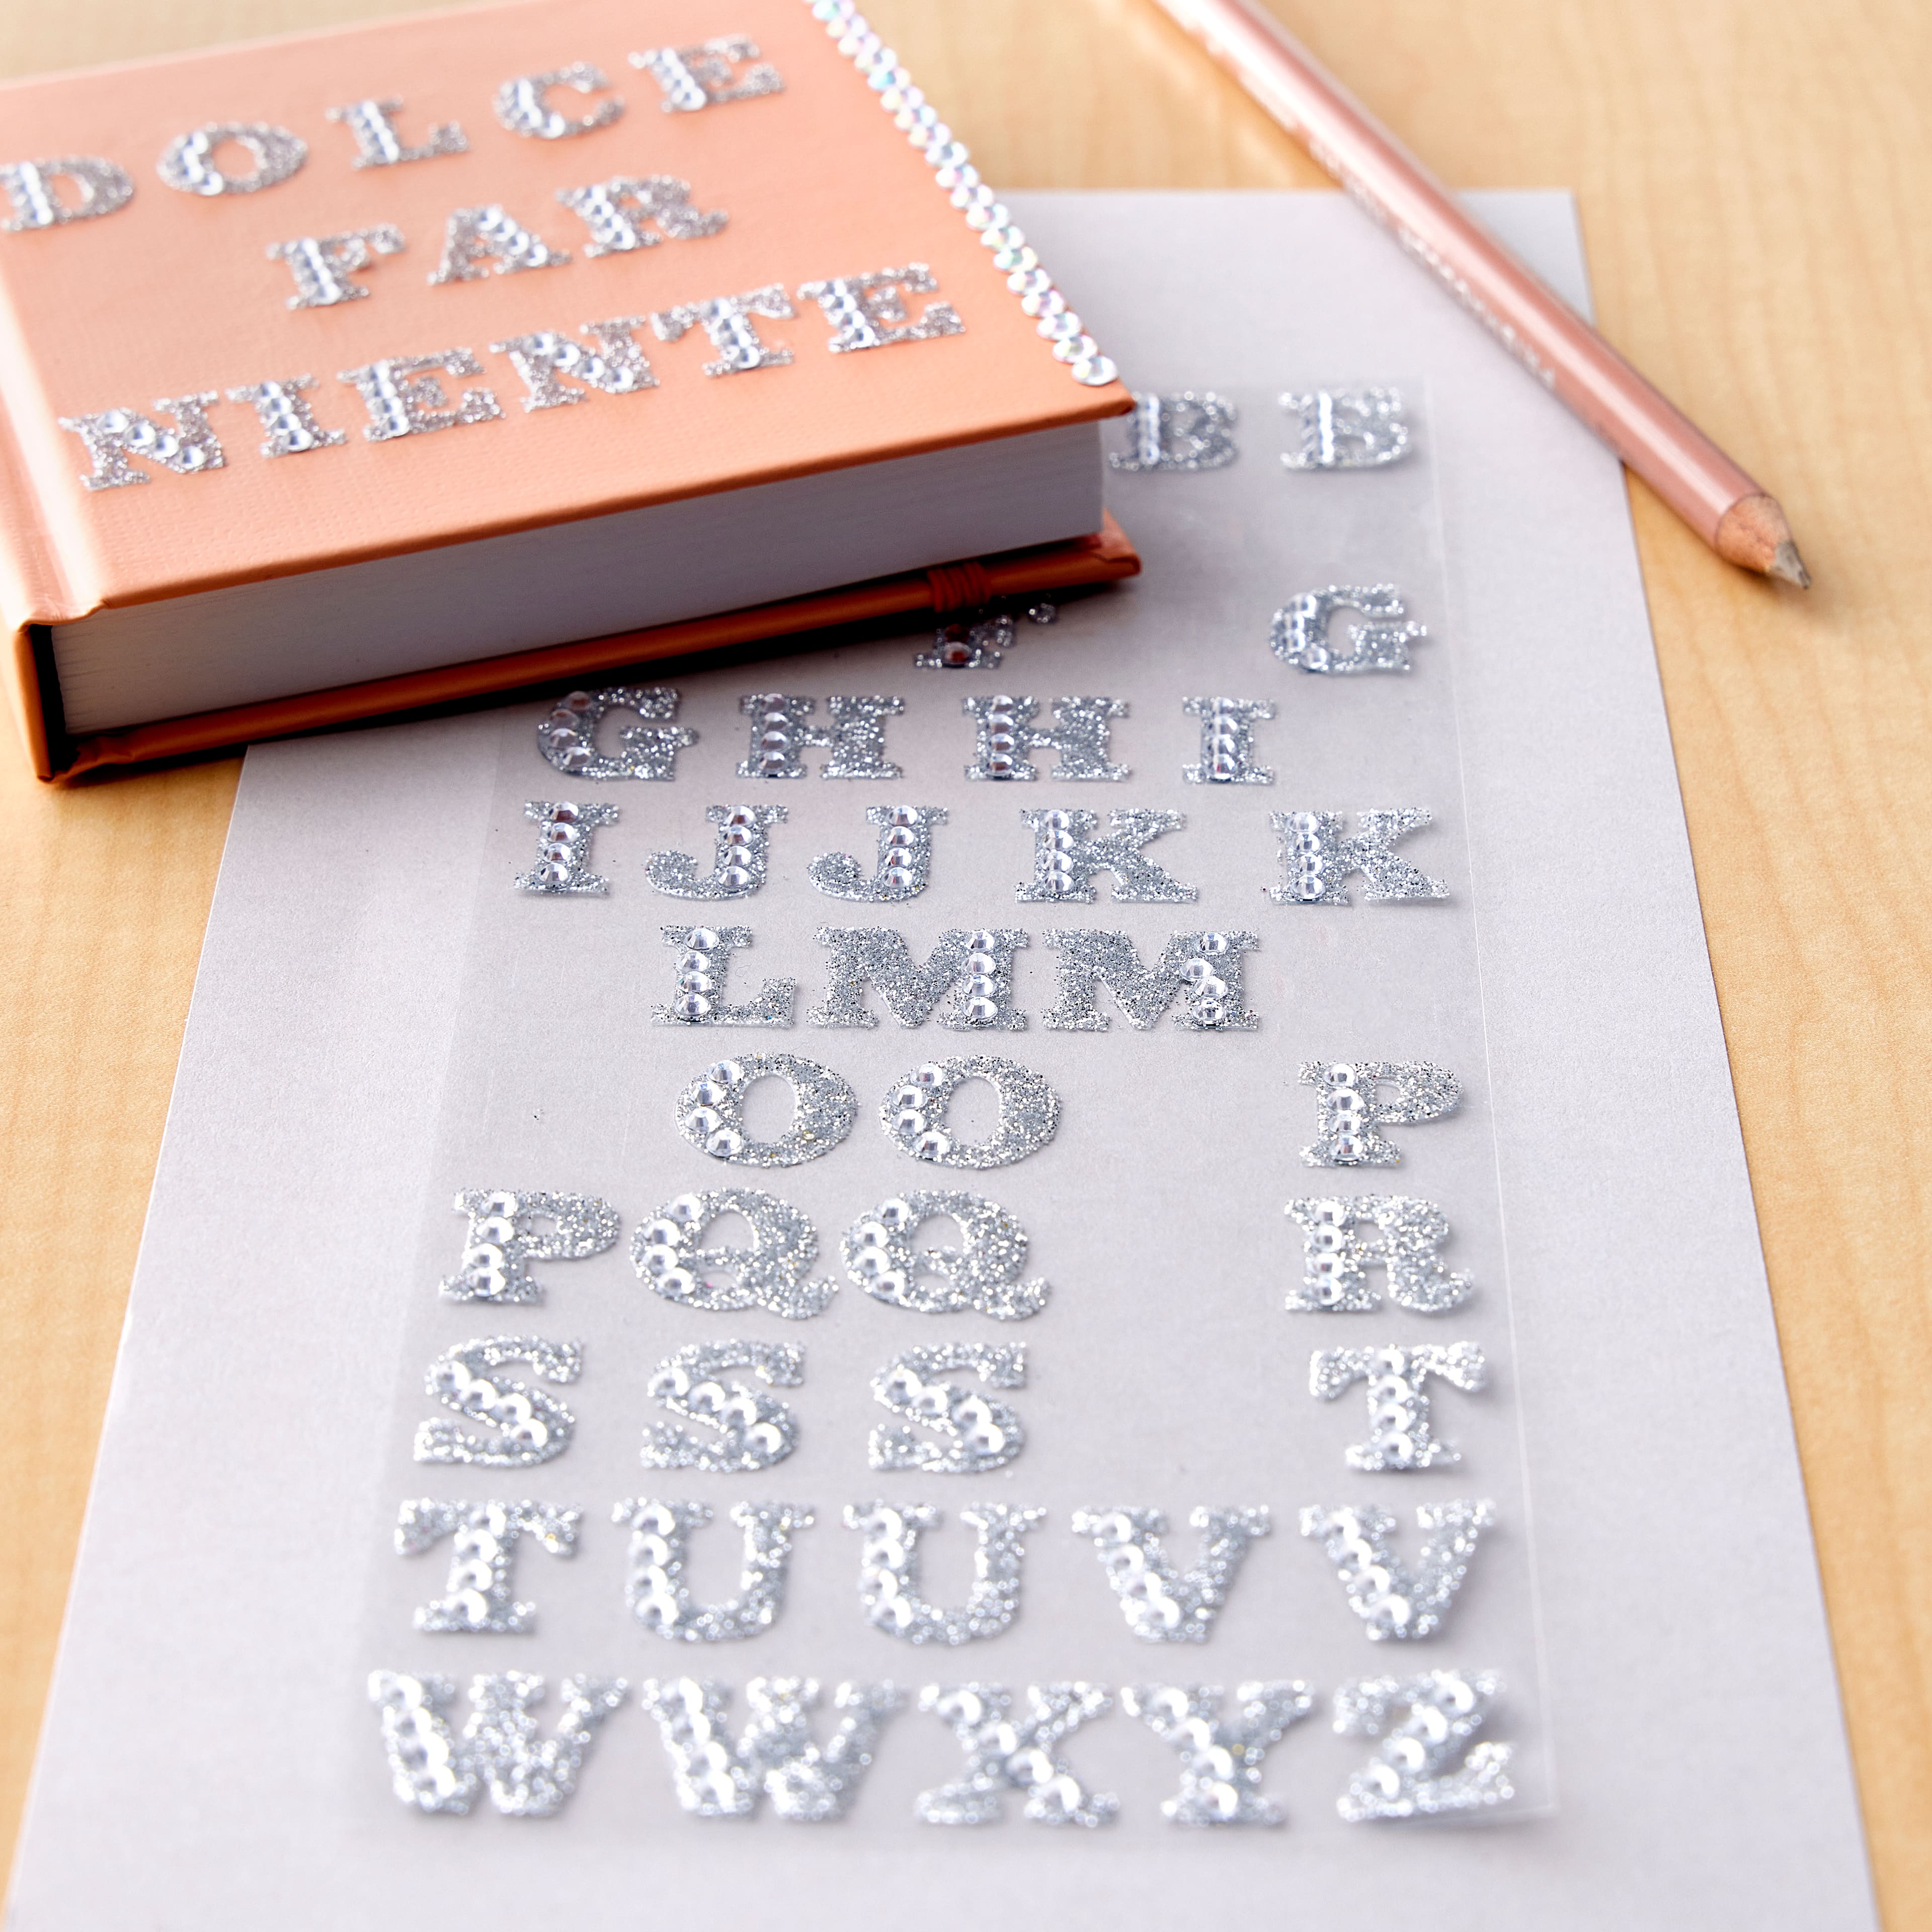 12 Packs: 55 ct. (660 total) Glitter Rhinestone Alphabet Stickers by Recollections&#x2122;